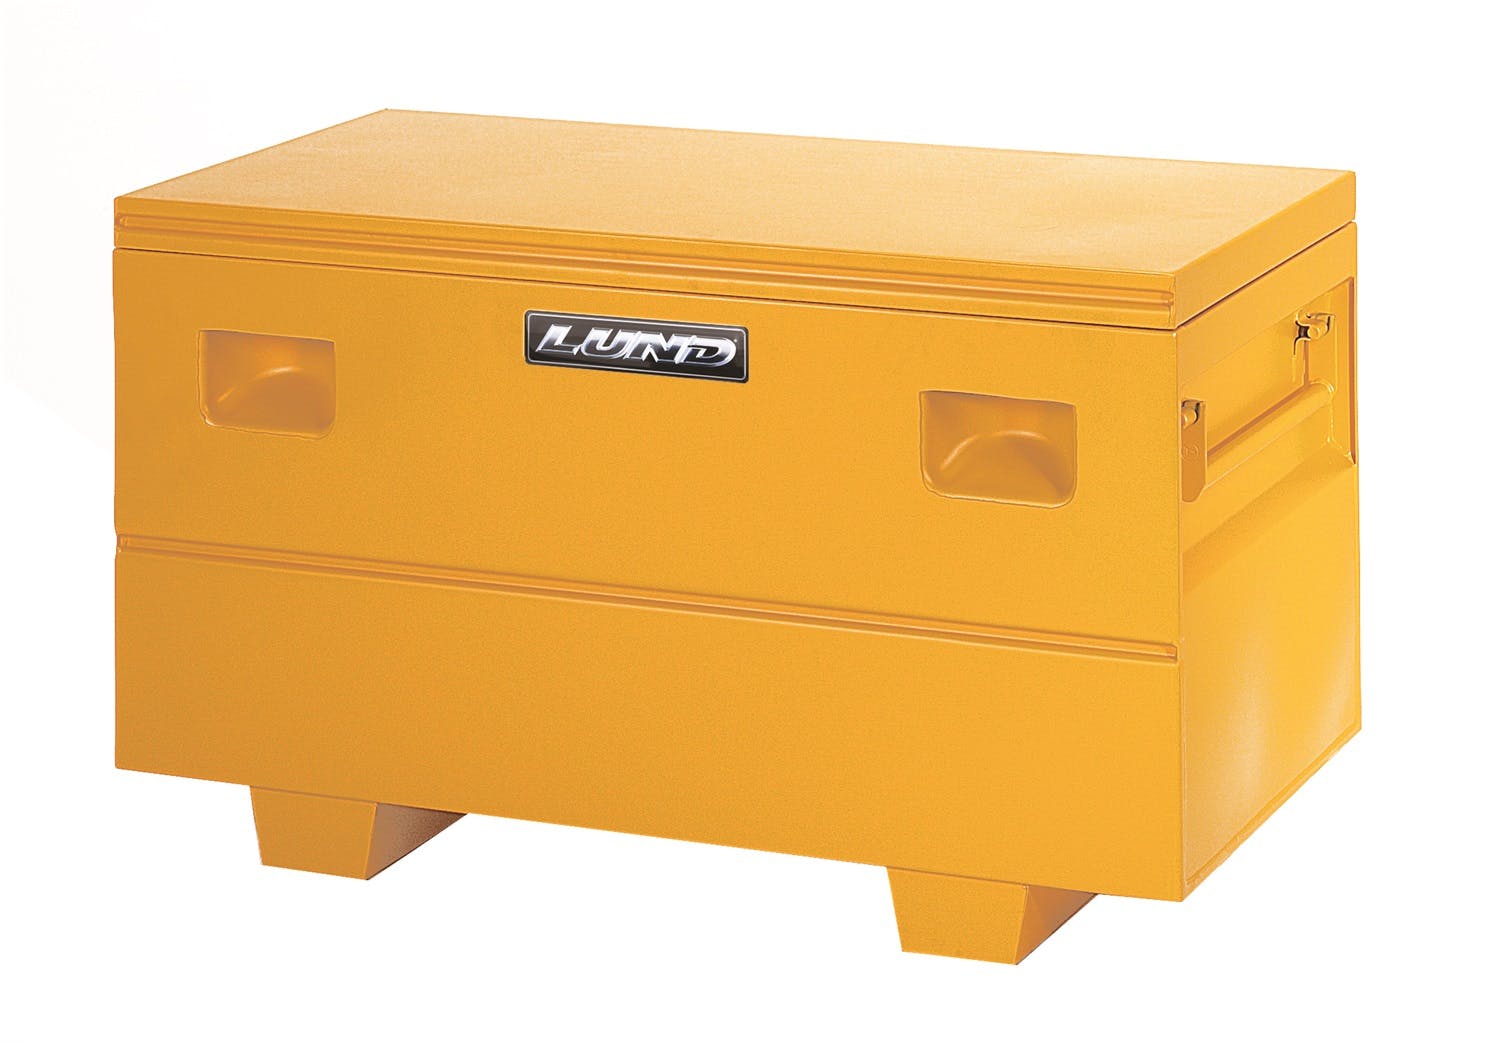 LUND 08048Y Steel Job Site Storage Box/Chest STEEL JOB SITE BOXES and CHEST